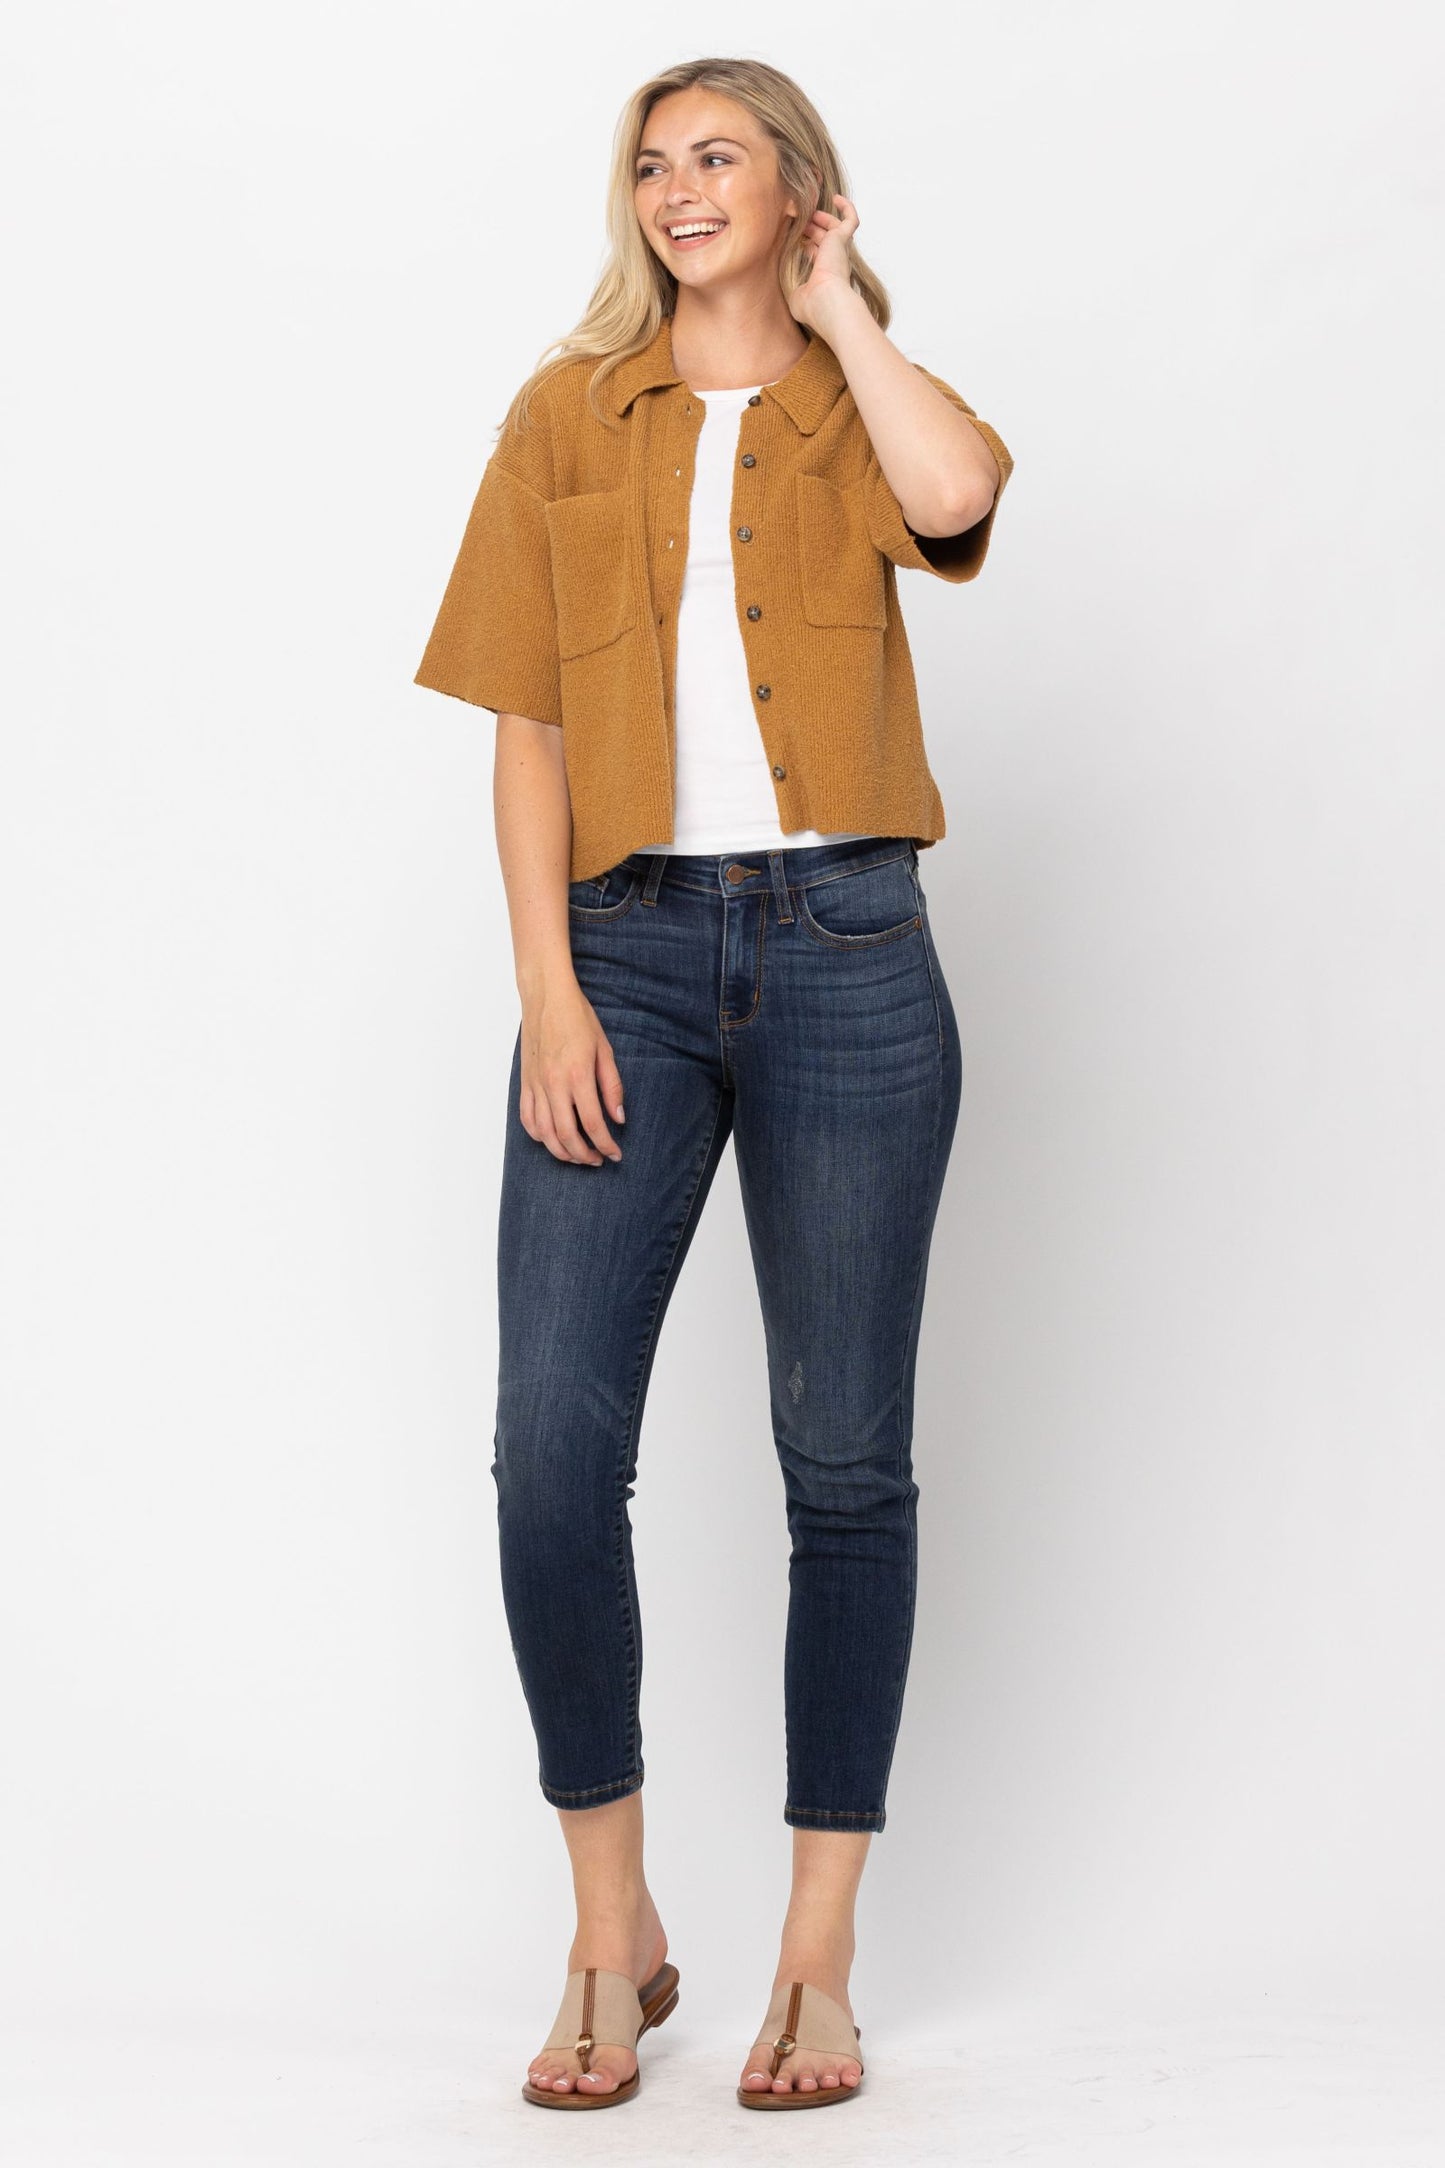 JUDY BLUE MID-RISE RELAXED FIT-2 INSEAM OPTIONS